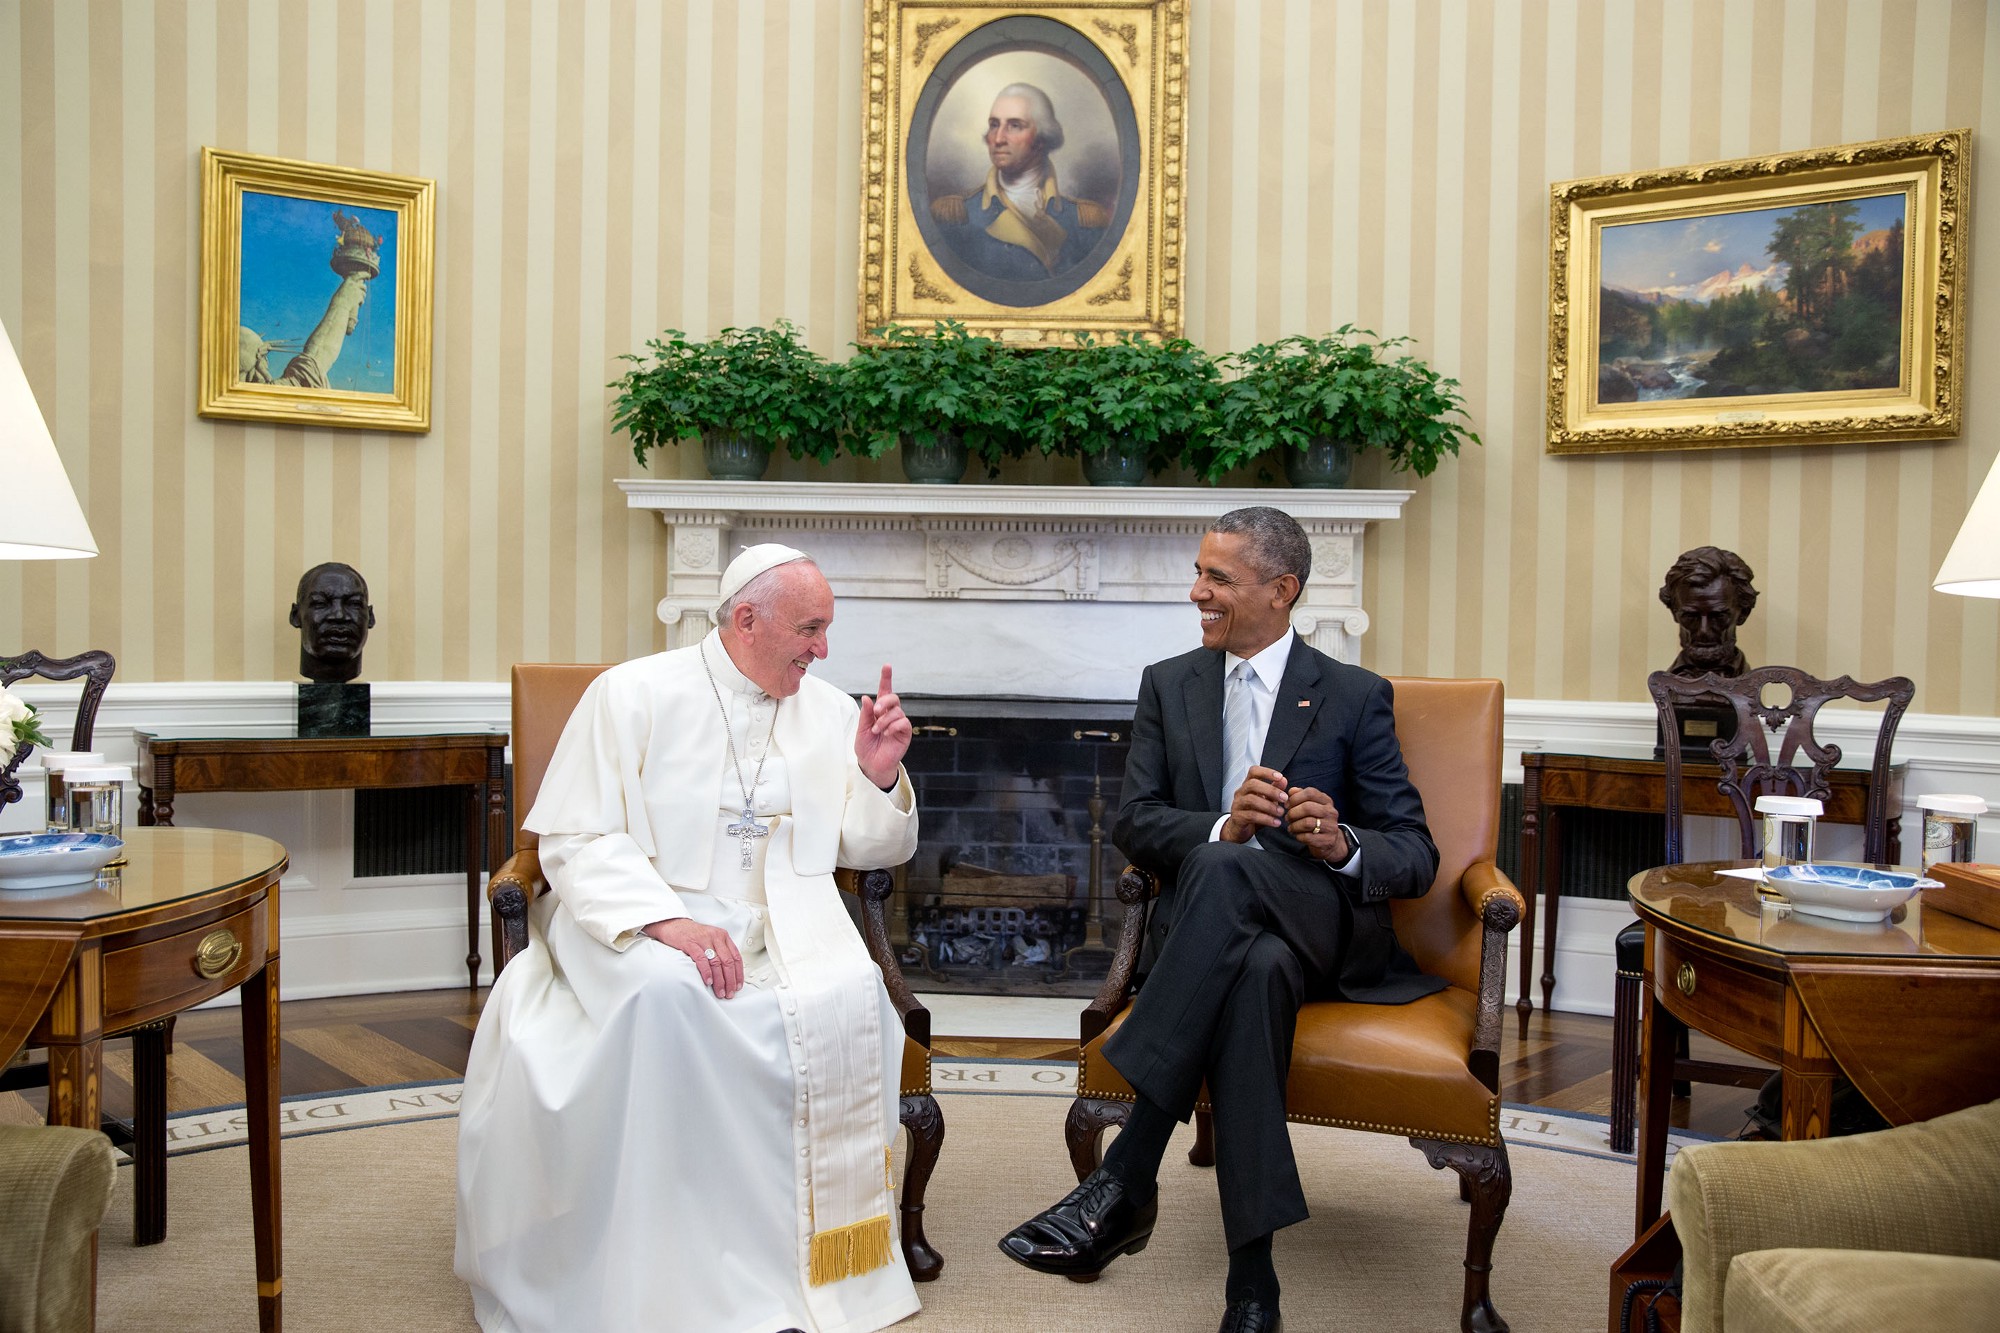 President Obama and Pope Francis talk before a meeting in the Oval Office. (Official White House Photo by Pete Souza)